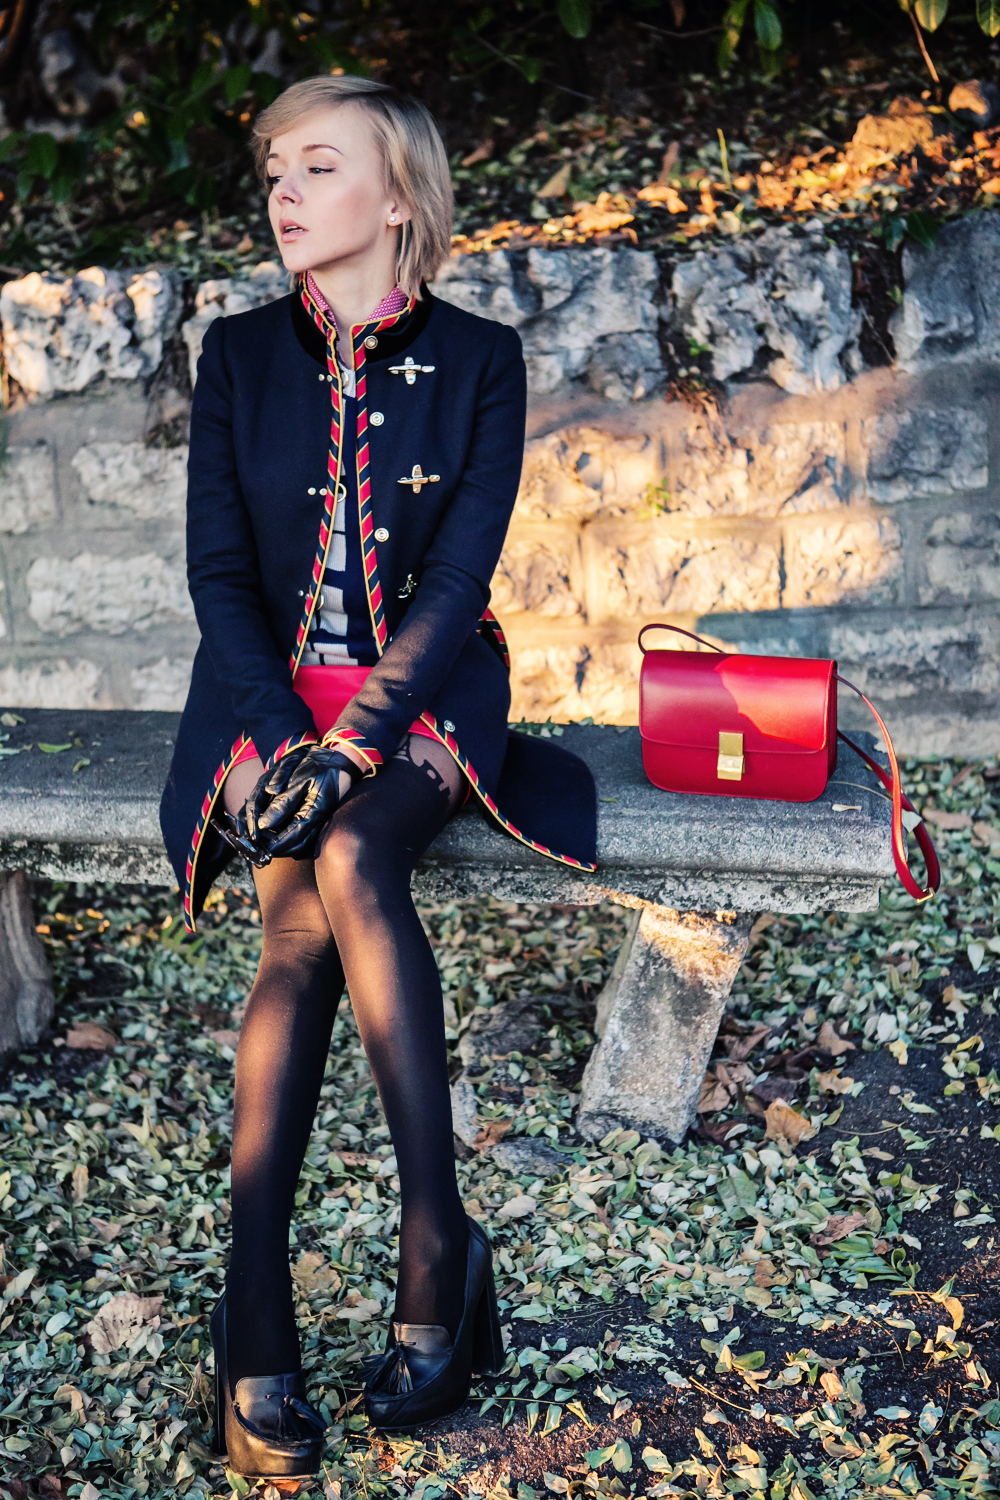 darya kamalova thecablook fashion blog russian blogger italy moda street style pixie short hair fashion blogger celine classic box bag red efil tower tights asos fay coat topshop chunky heels star ring thallo red leather skirt etro shirt brescia-11 co